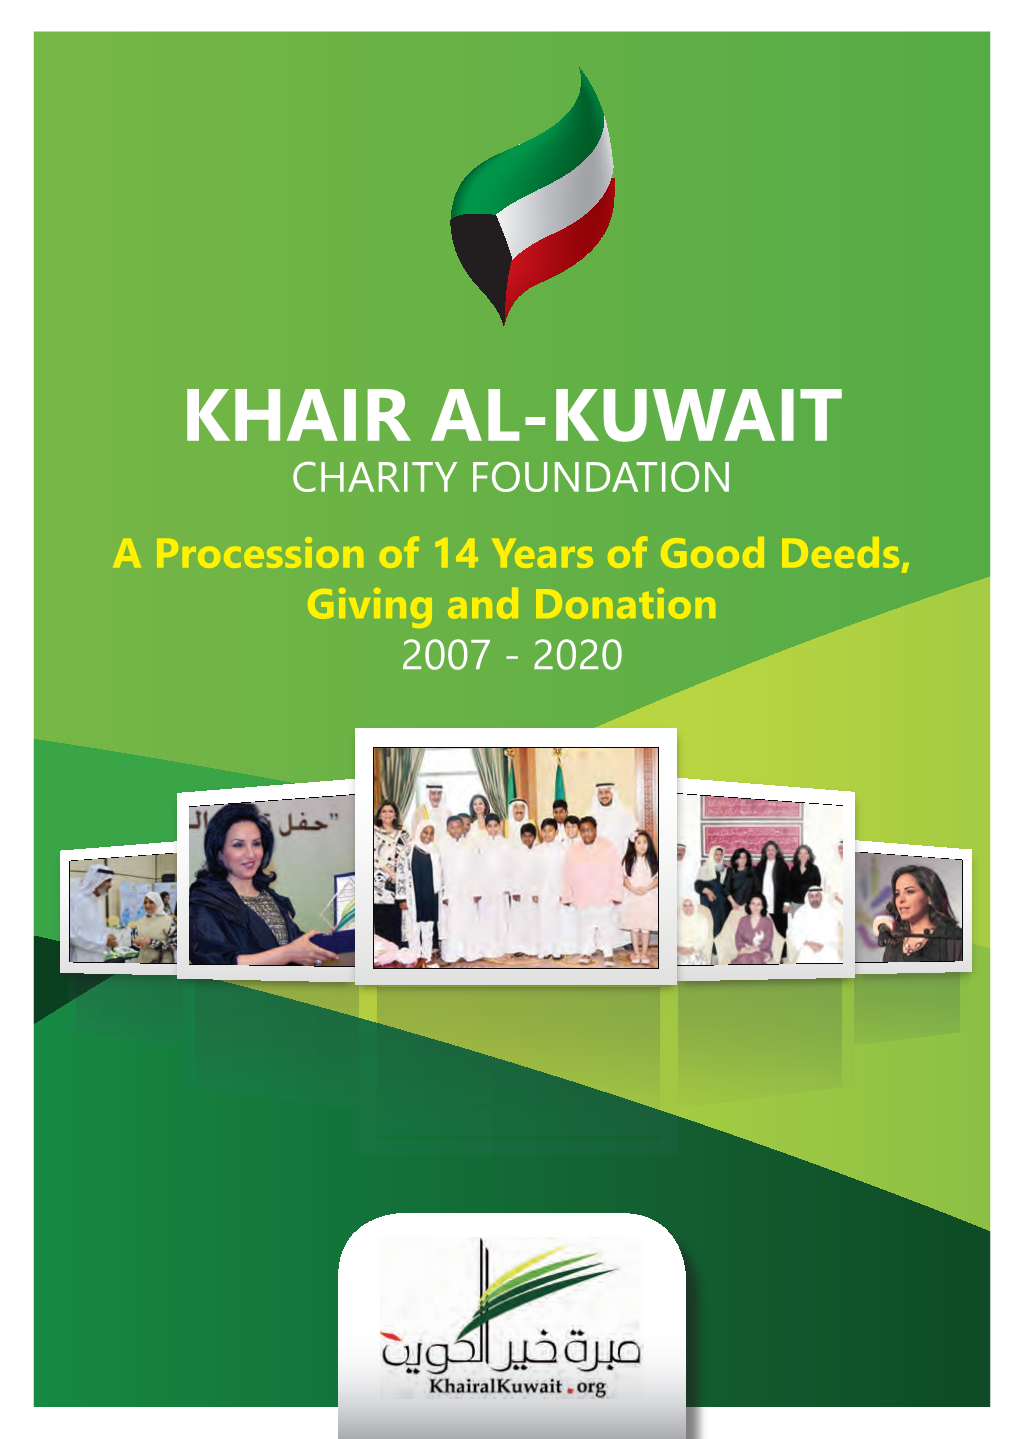 KHAIR AL-KUWAIT CHARITY FOUNDATION a Procession of 14 Years of Good Deeds, Giving and Donation 2007 - 2020 Sdgtfsdfhhgkhjkgg